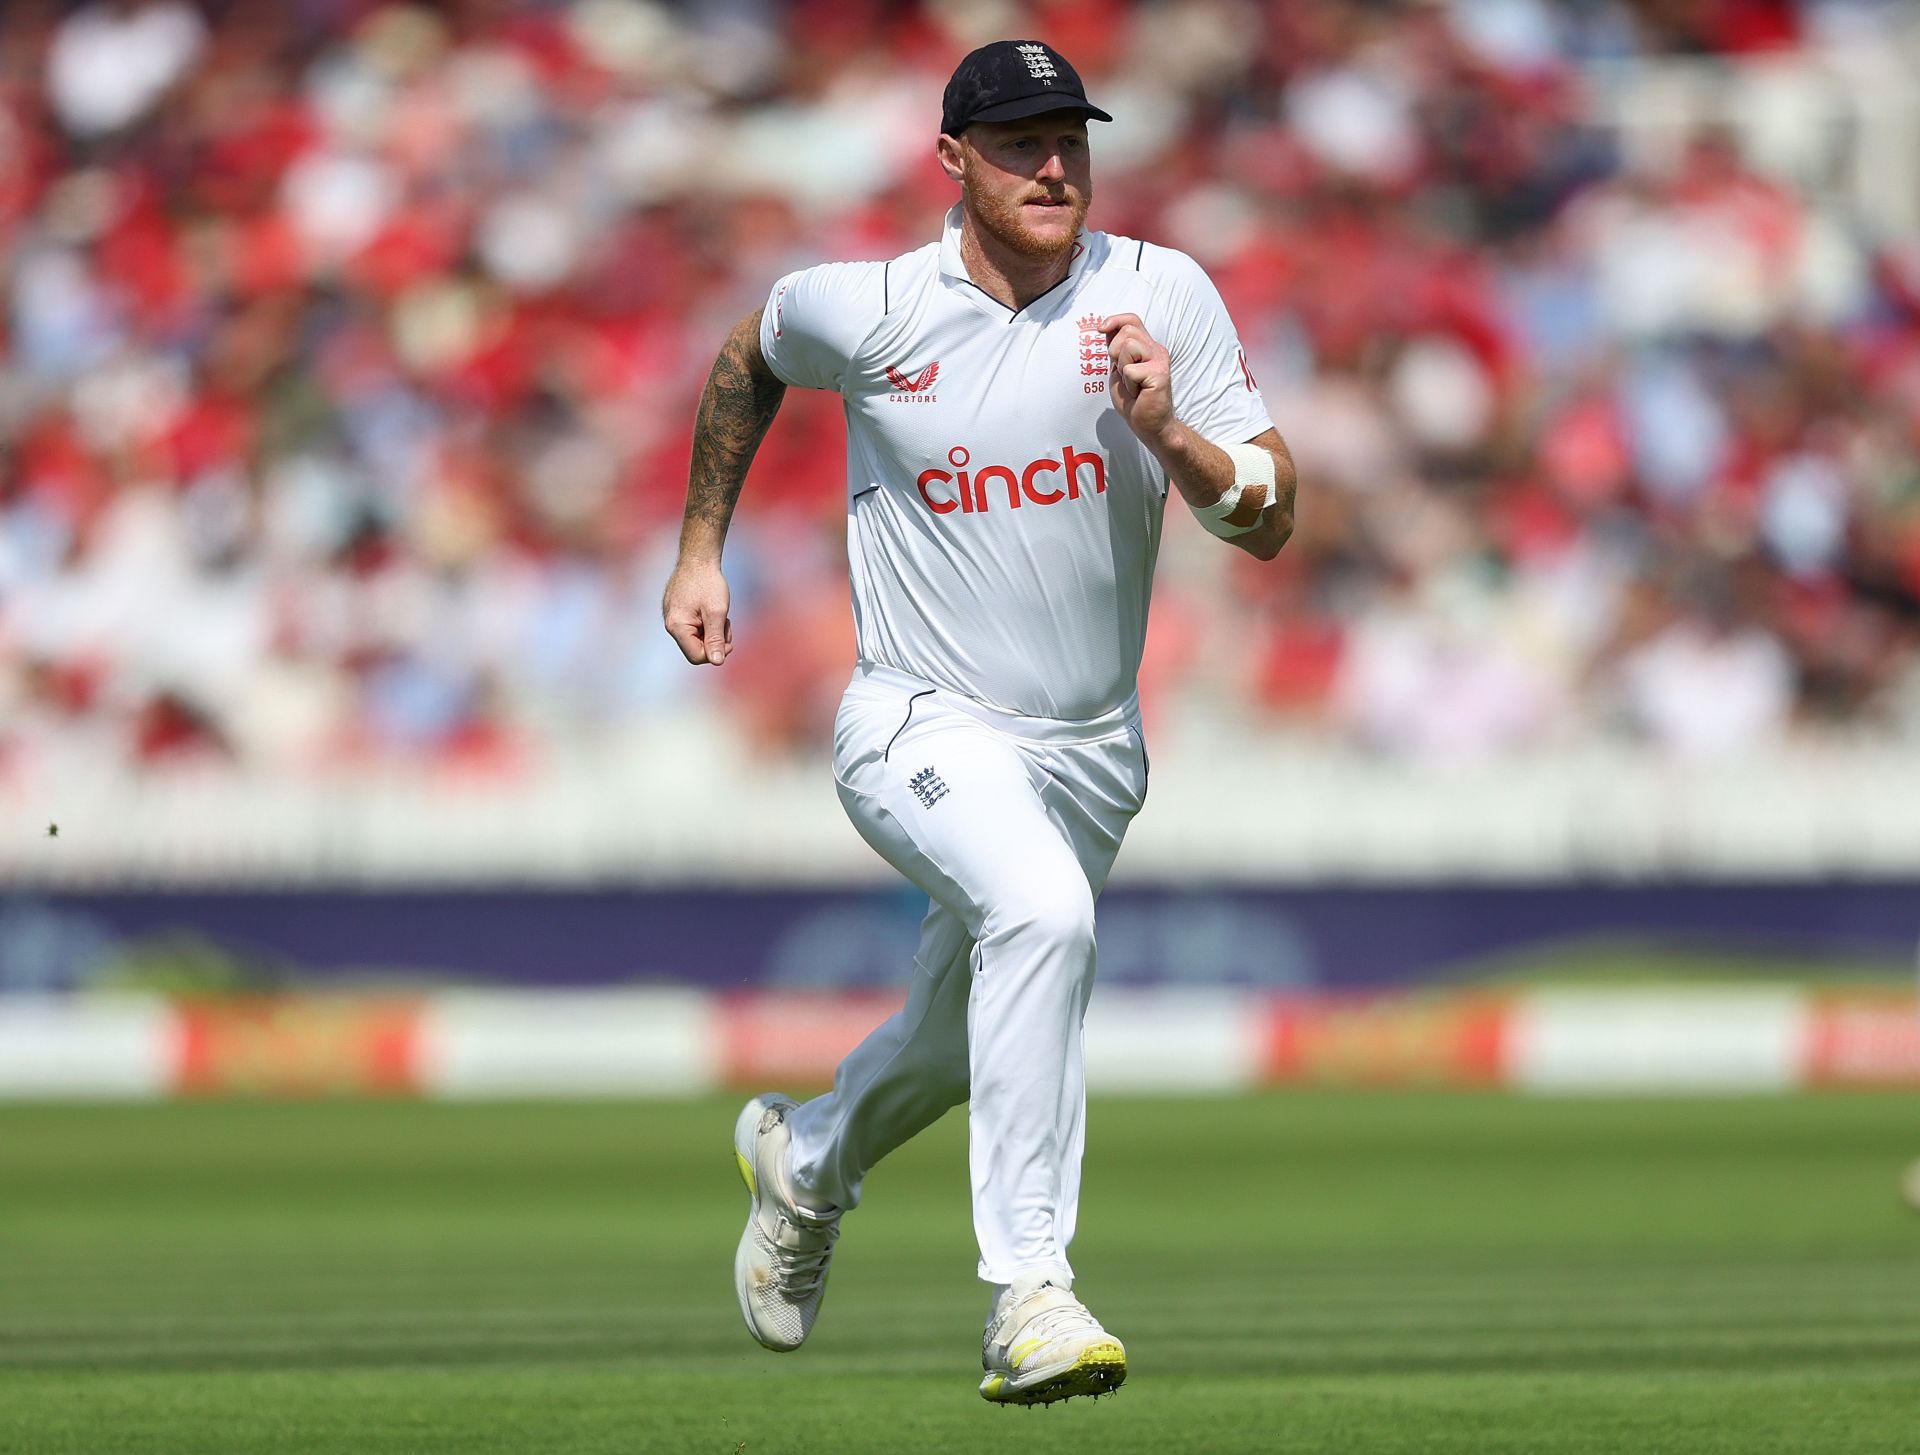 Ben Stokes suffered his first Test loss as full-time captain. (Image Credits: Getty)